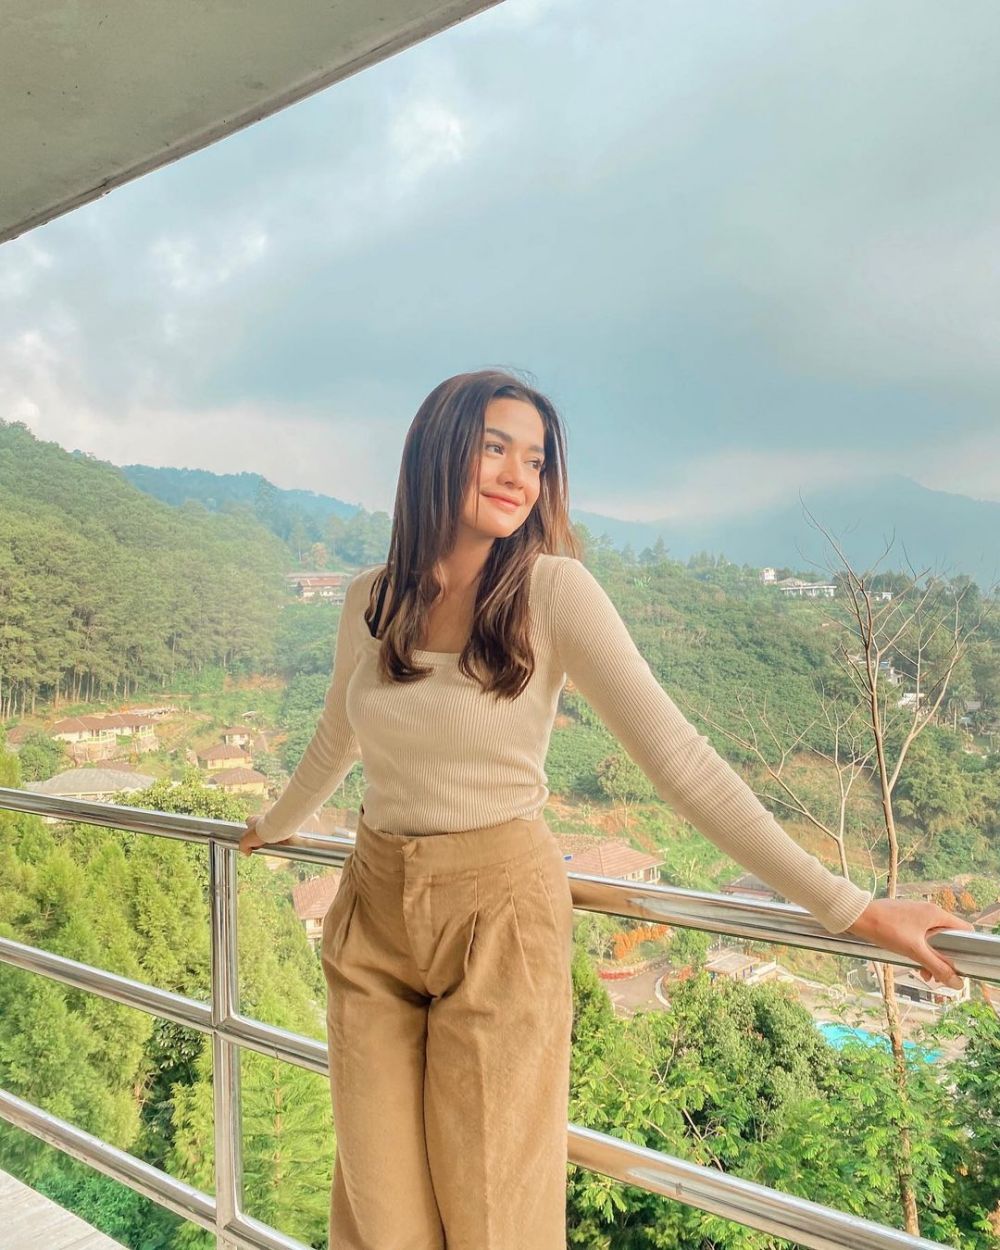 10 Ide Outfit Liburan ala Andi Annisa Iasyah, Chic Abis!   